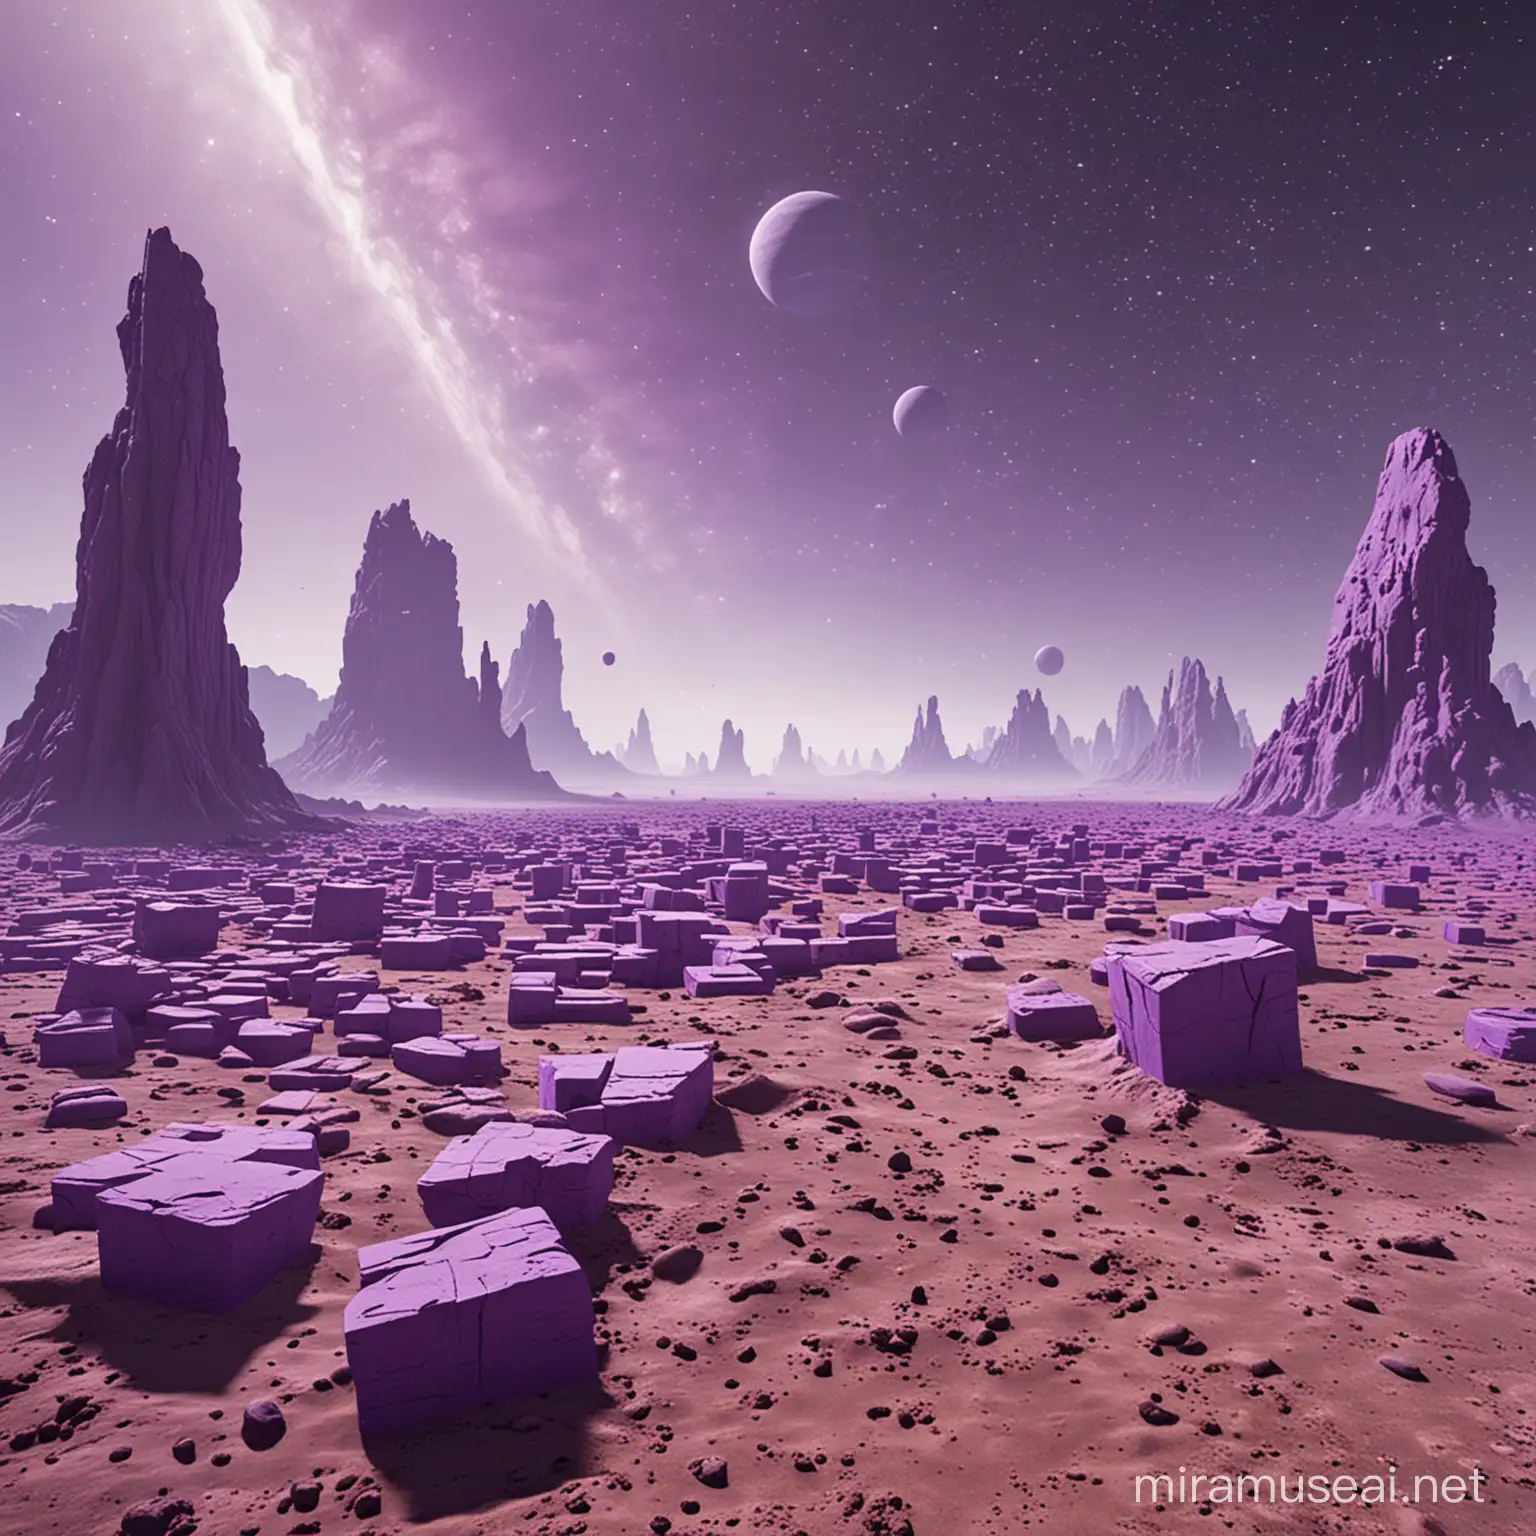 Ethereal Alien Landscape with Enigmatic Purple Monoliths